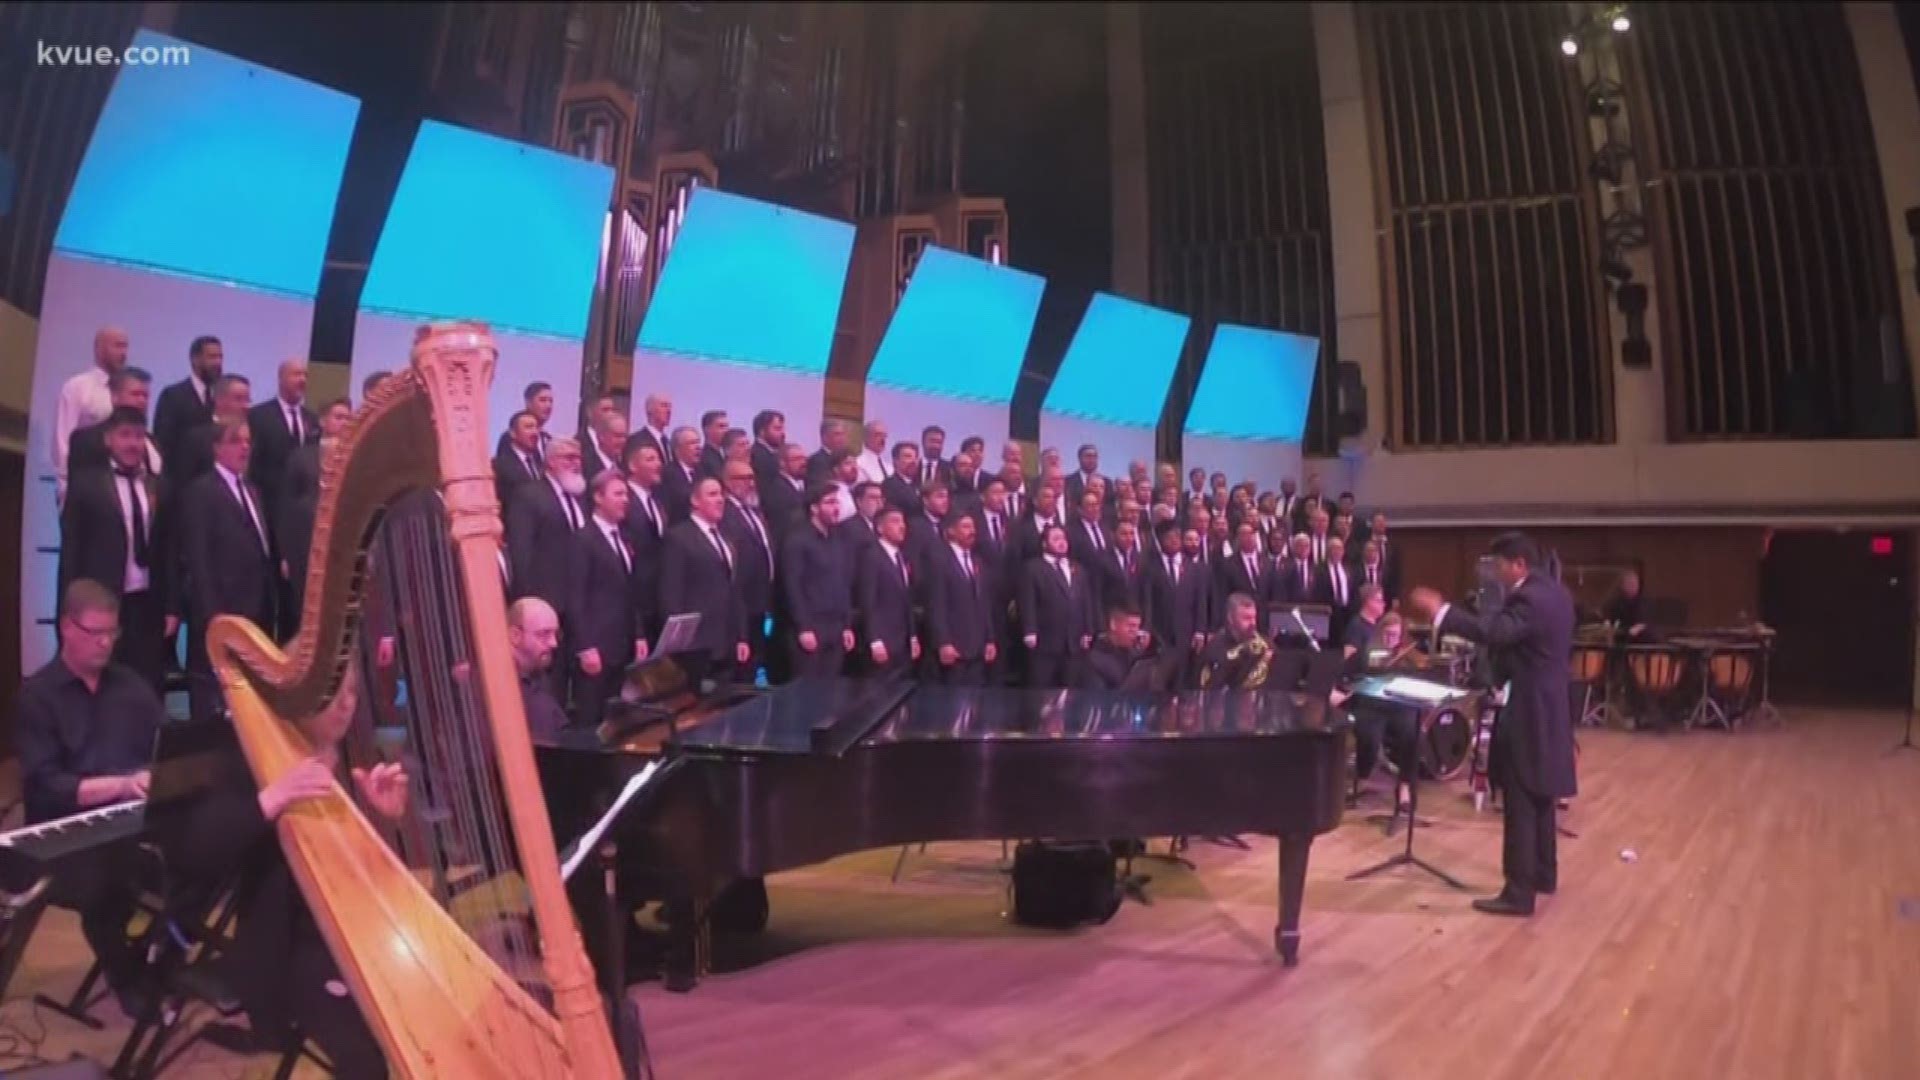 Members of the chorus stopped by KVUE to talk about it, including Jason Theilengerdes.